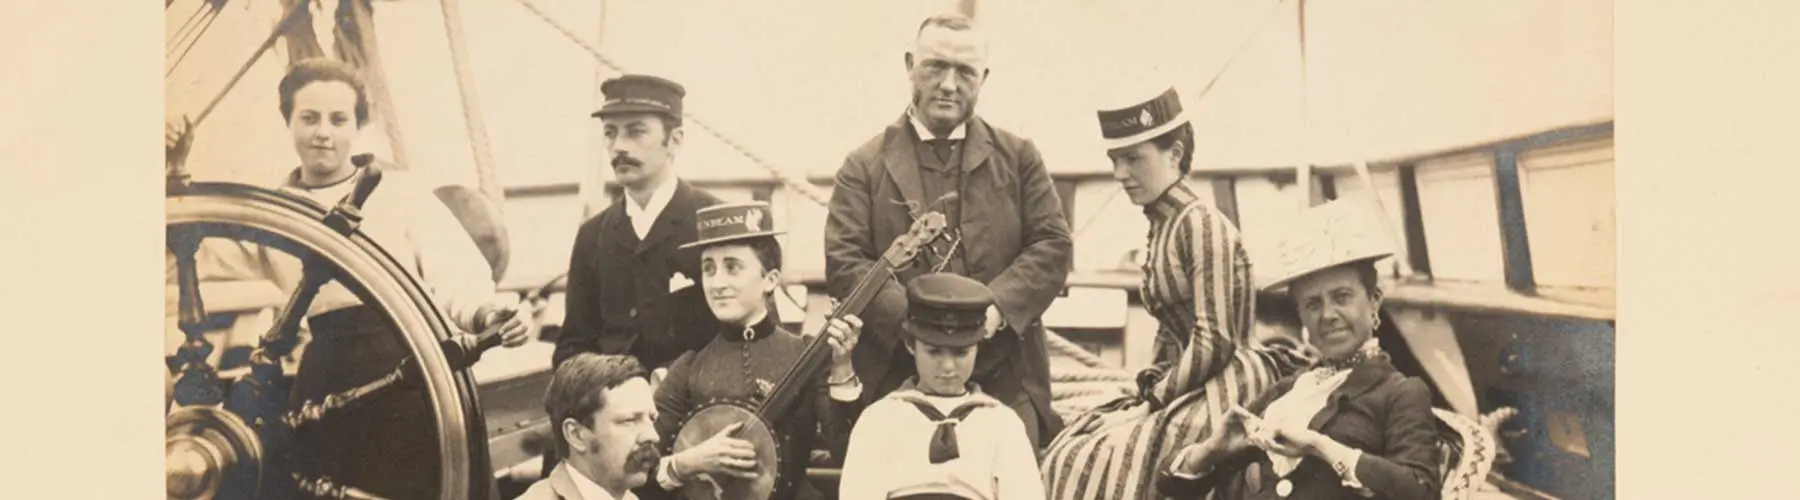 b/w photo of men and women on a ship deck with a banjo